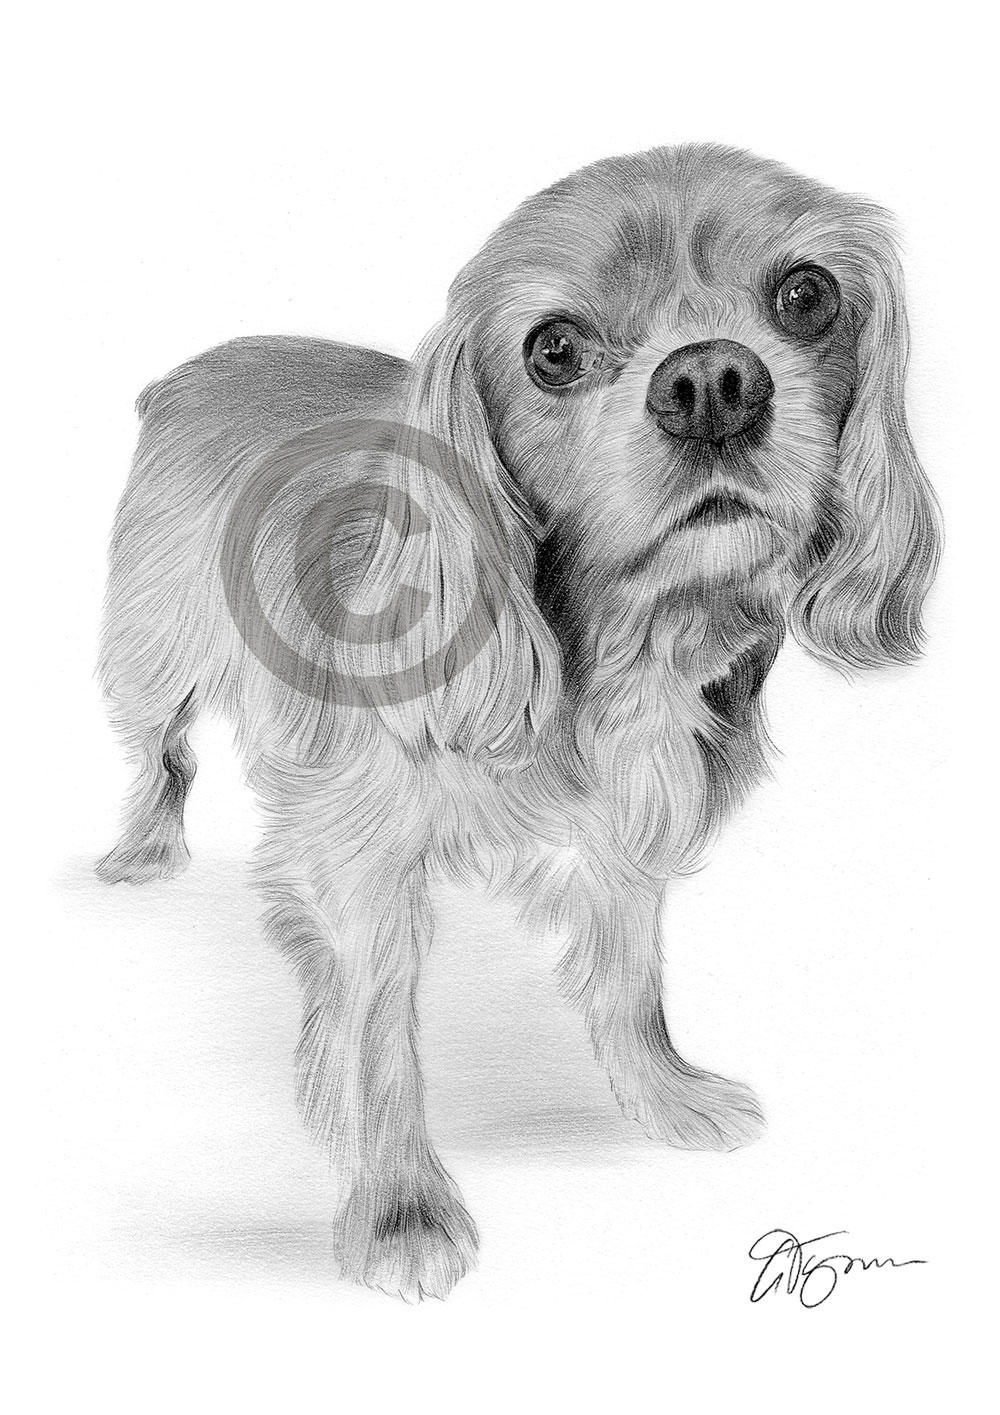 Pencil drawing of a young King Charles Spaniel puppy by artist Gary Tymon